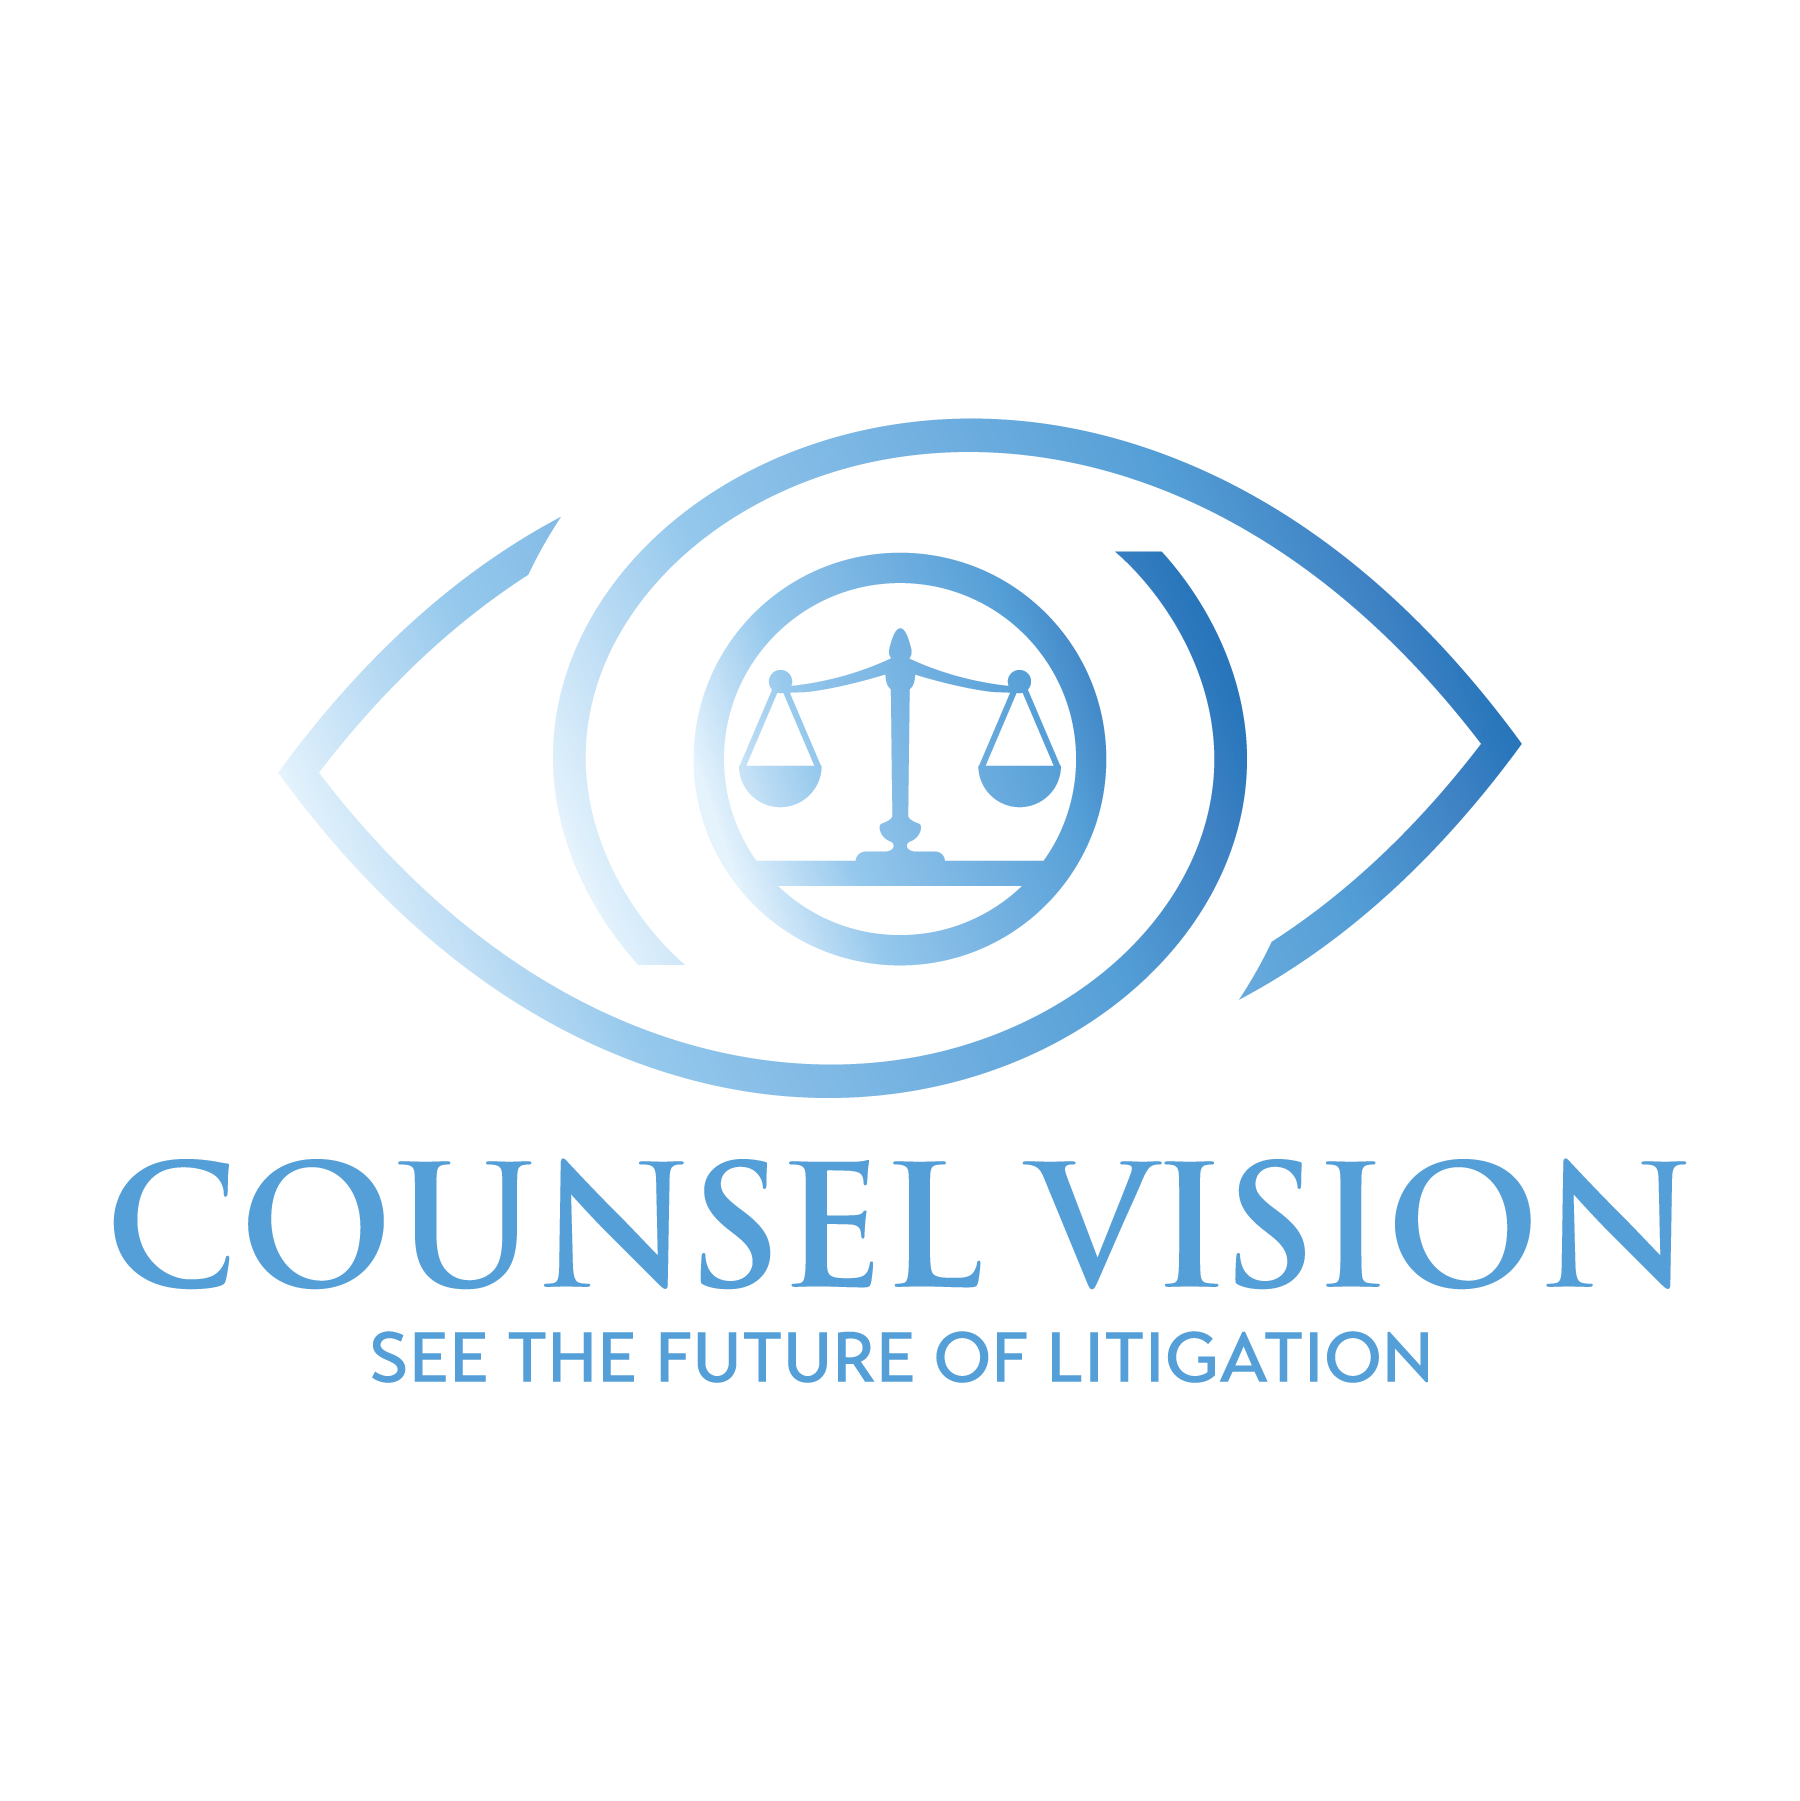 counsel vision claims lawsuits and discovery